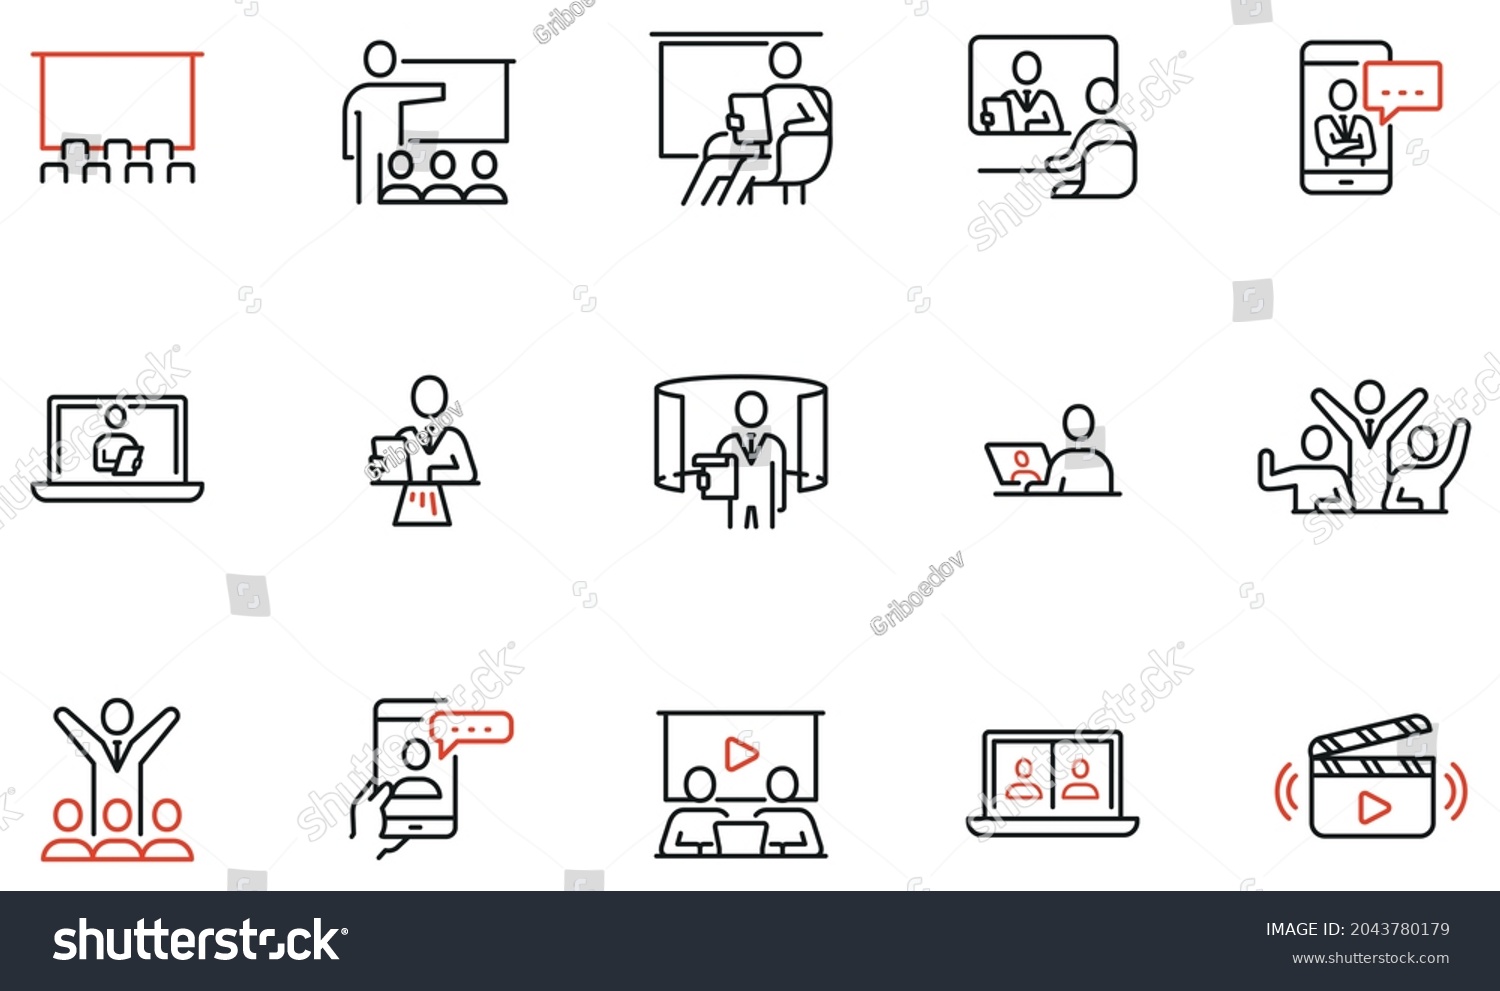 Vector Set of Linear Icons Related to Online Seminar, Virtual Conference, Webinar and Presentation. Sharing Ideas Using Video Applications. Mono Line Pictograms and Infographics Design Elements  #2043780179